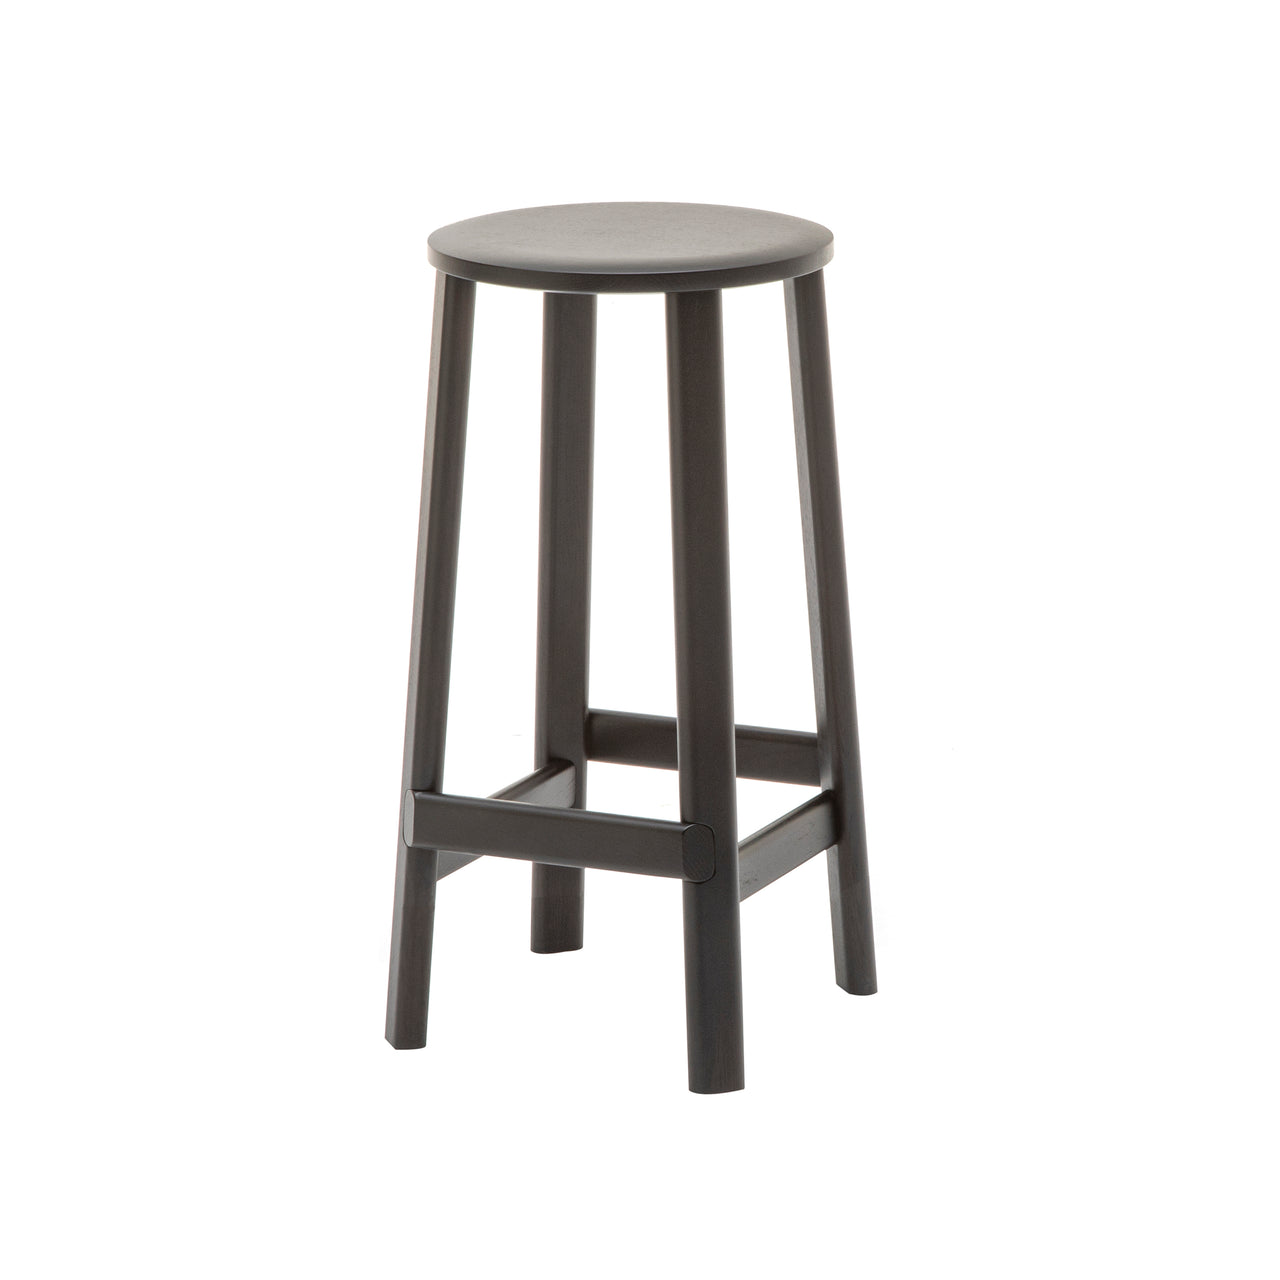 Archive Bar + Counter Stool: Counter + Black + Without Pad